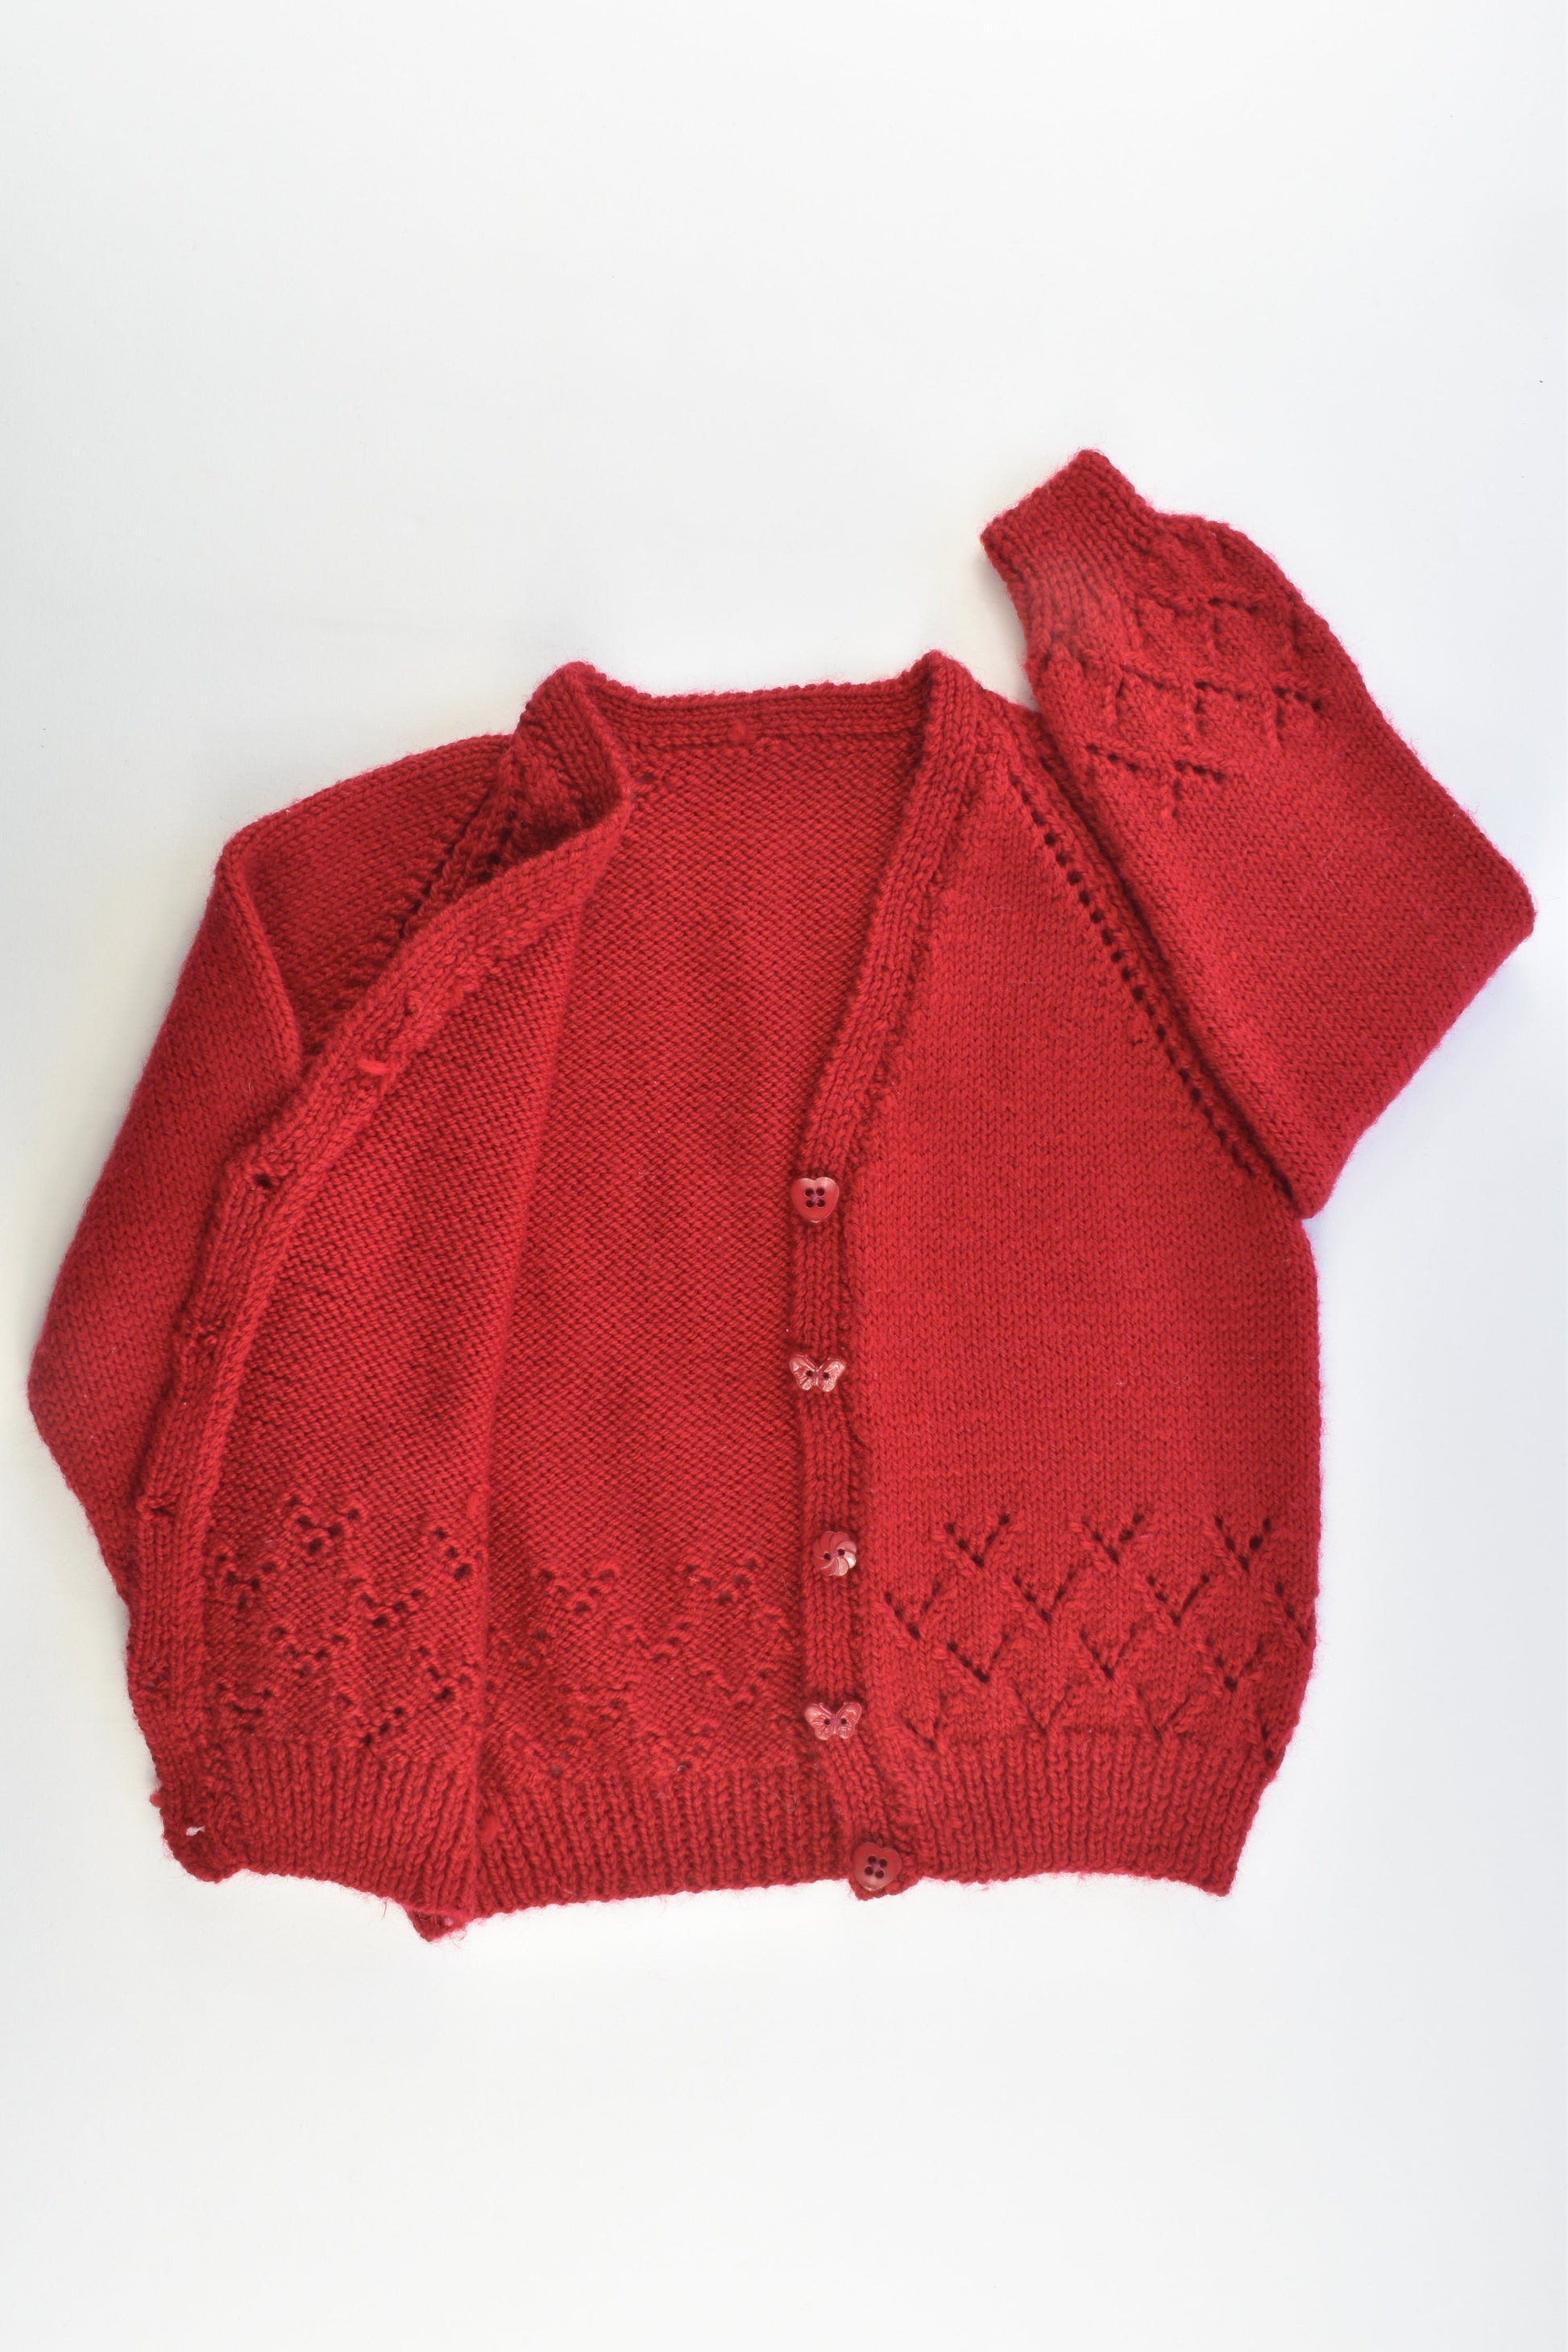 Handmade Size approx 5-6 Knitted Wool Cardigan